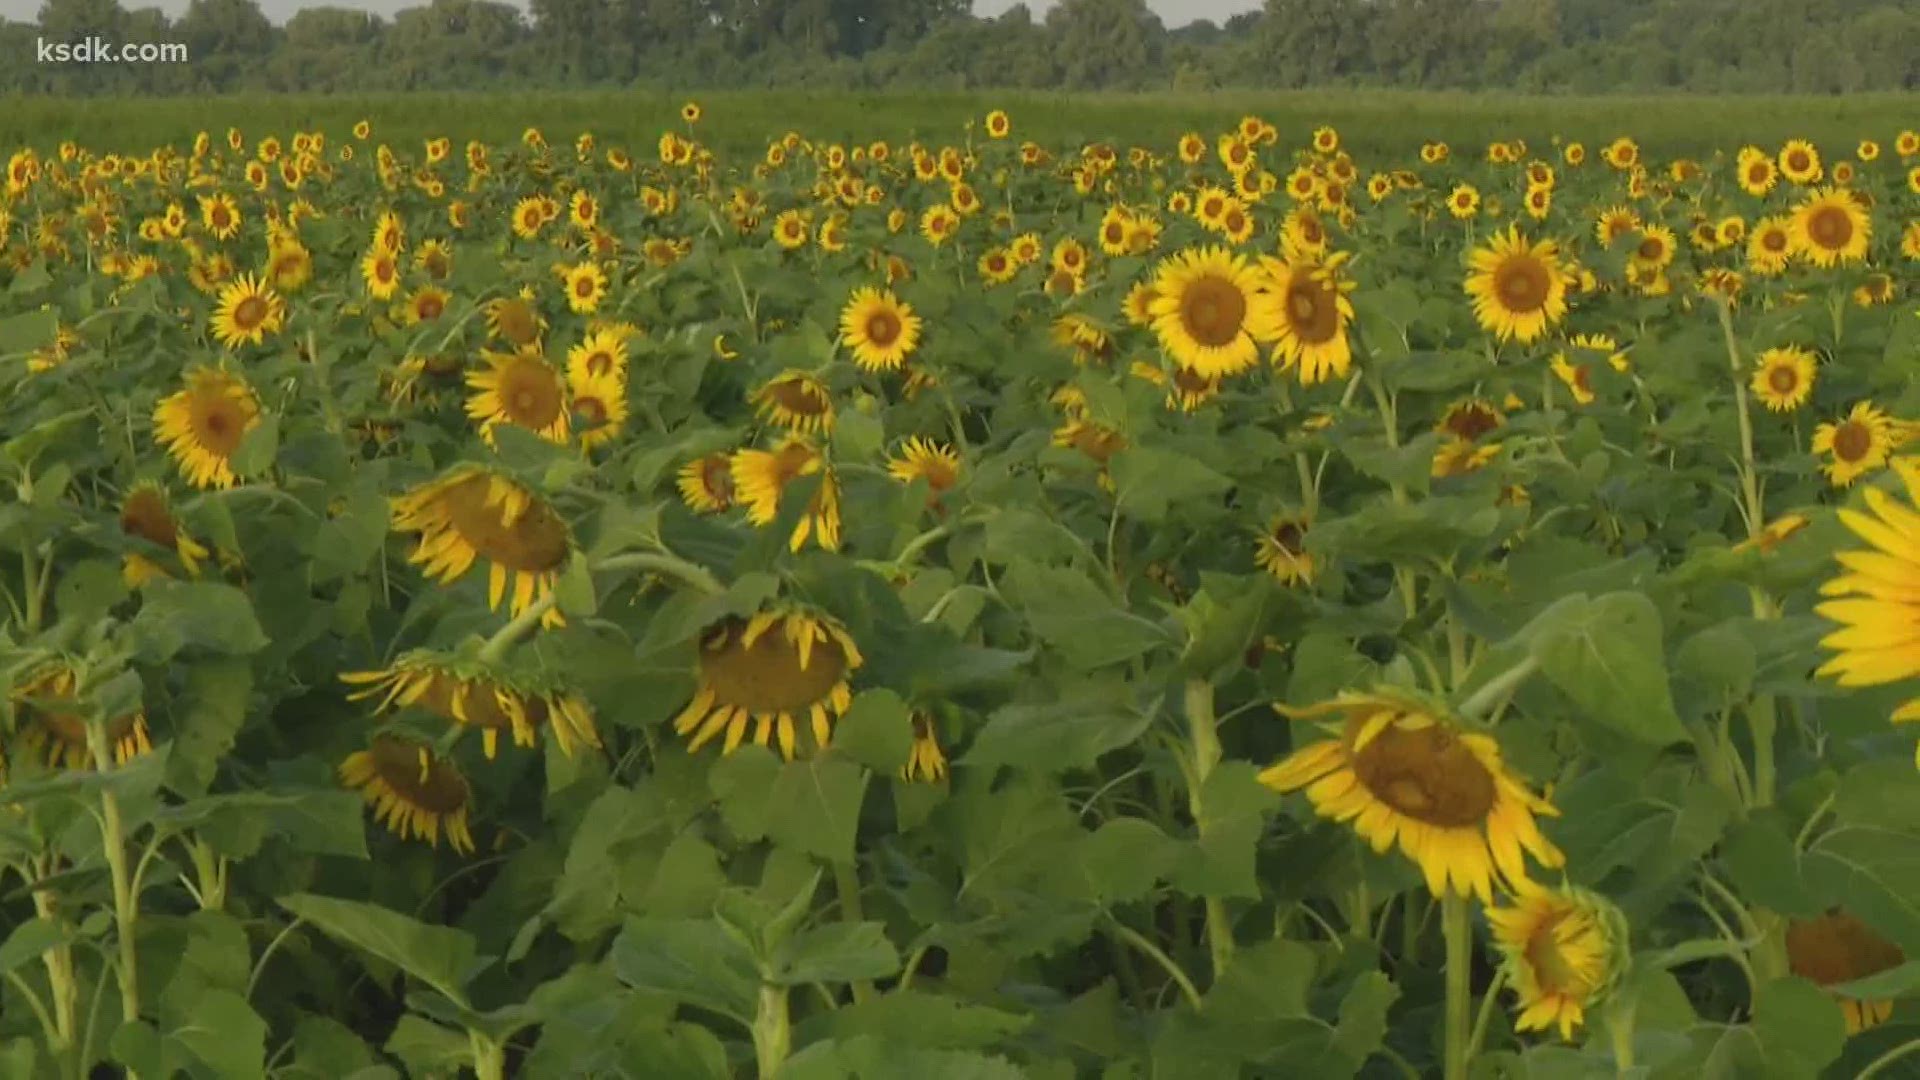 The bright yellow blooms have returned to the Columbia Bottom Conservation Area this summer.